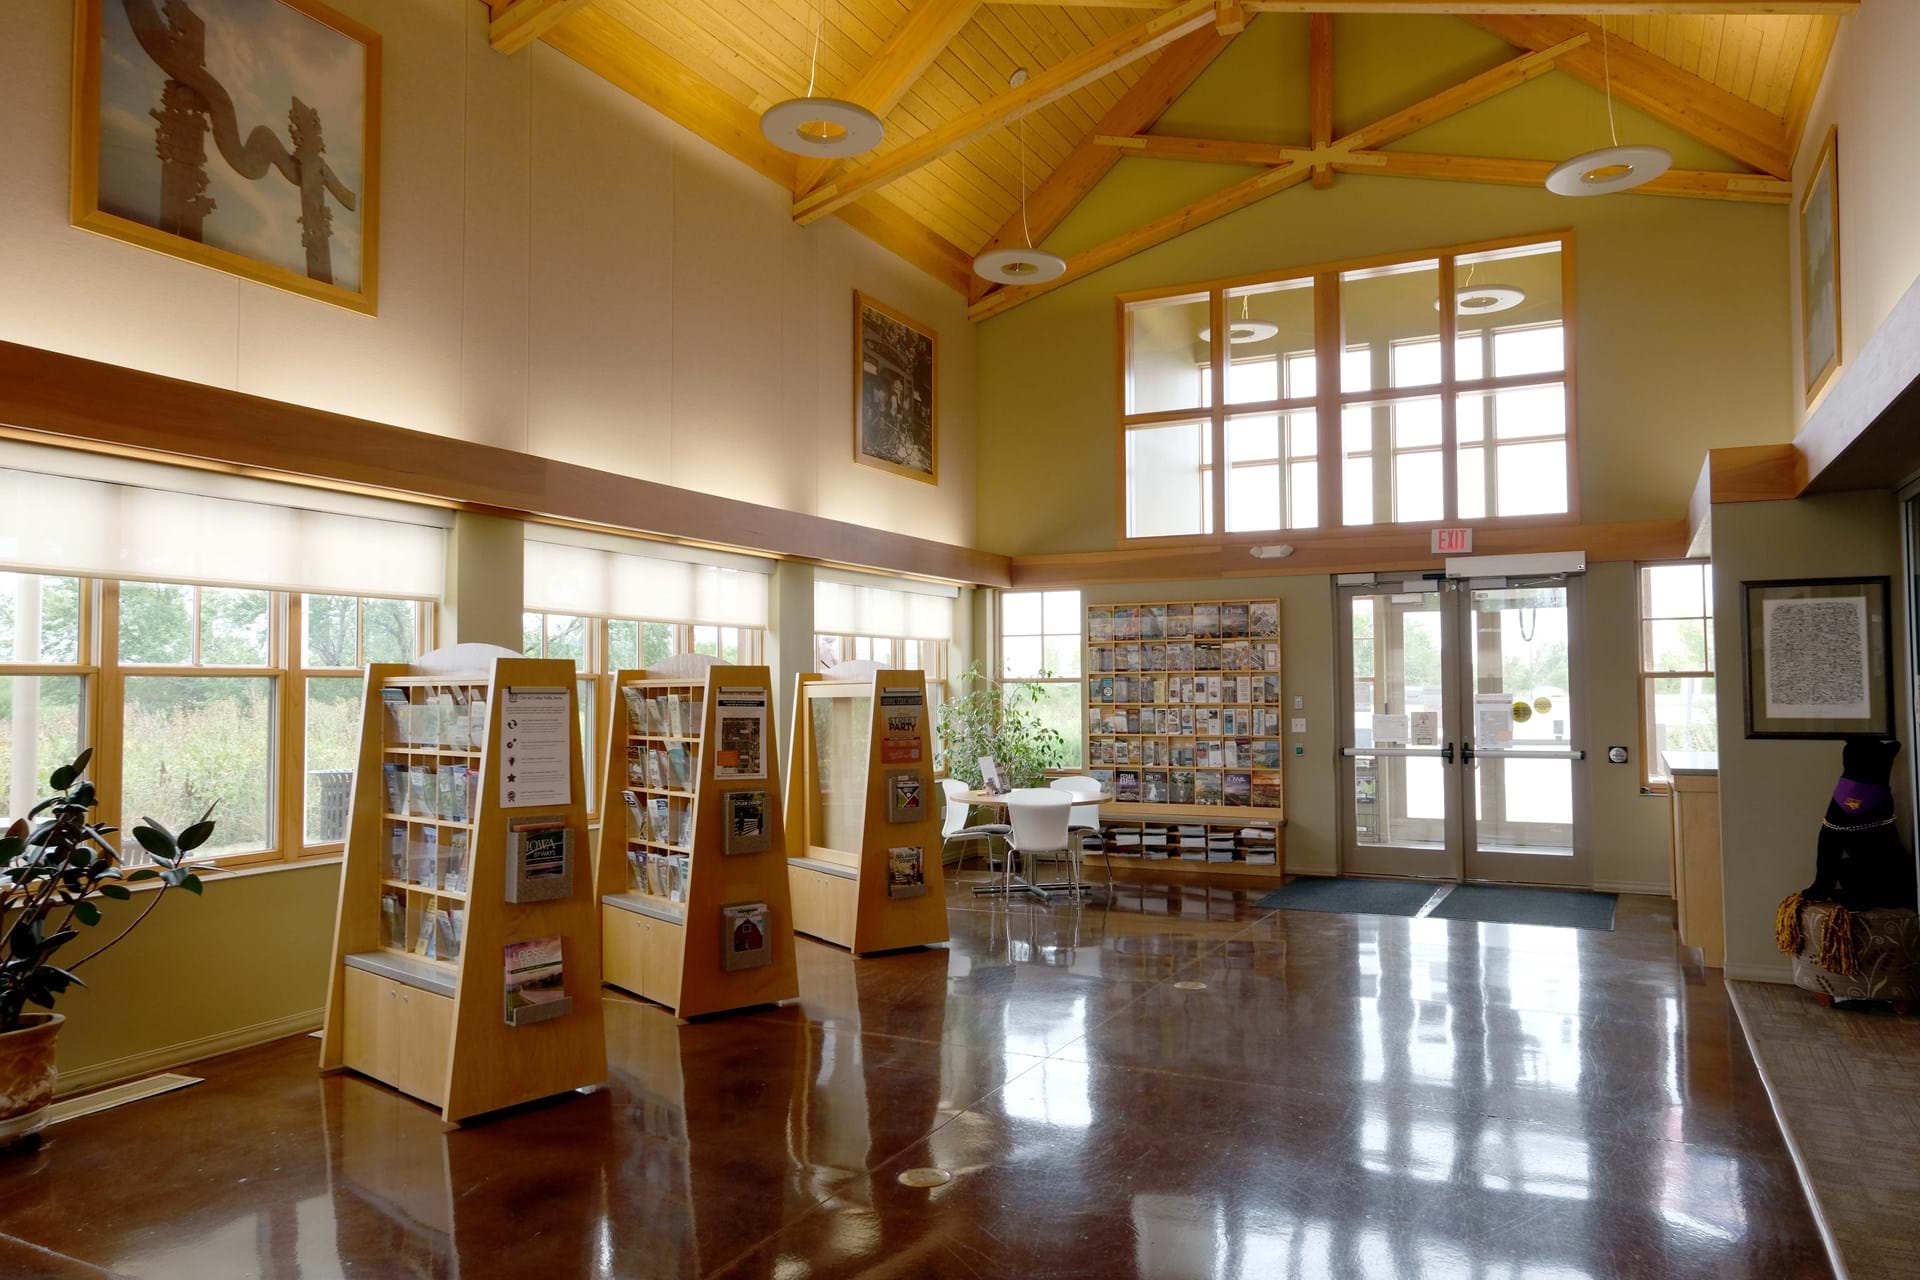  Visitor Center Interior with Brochure Racks